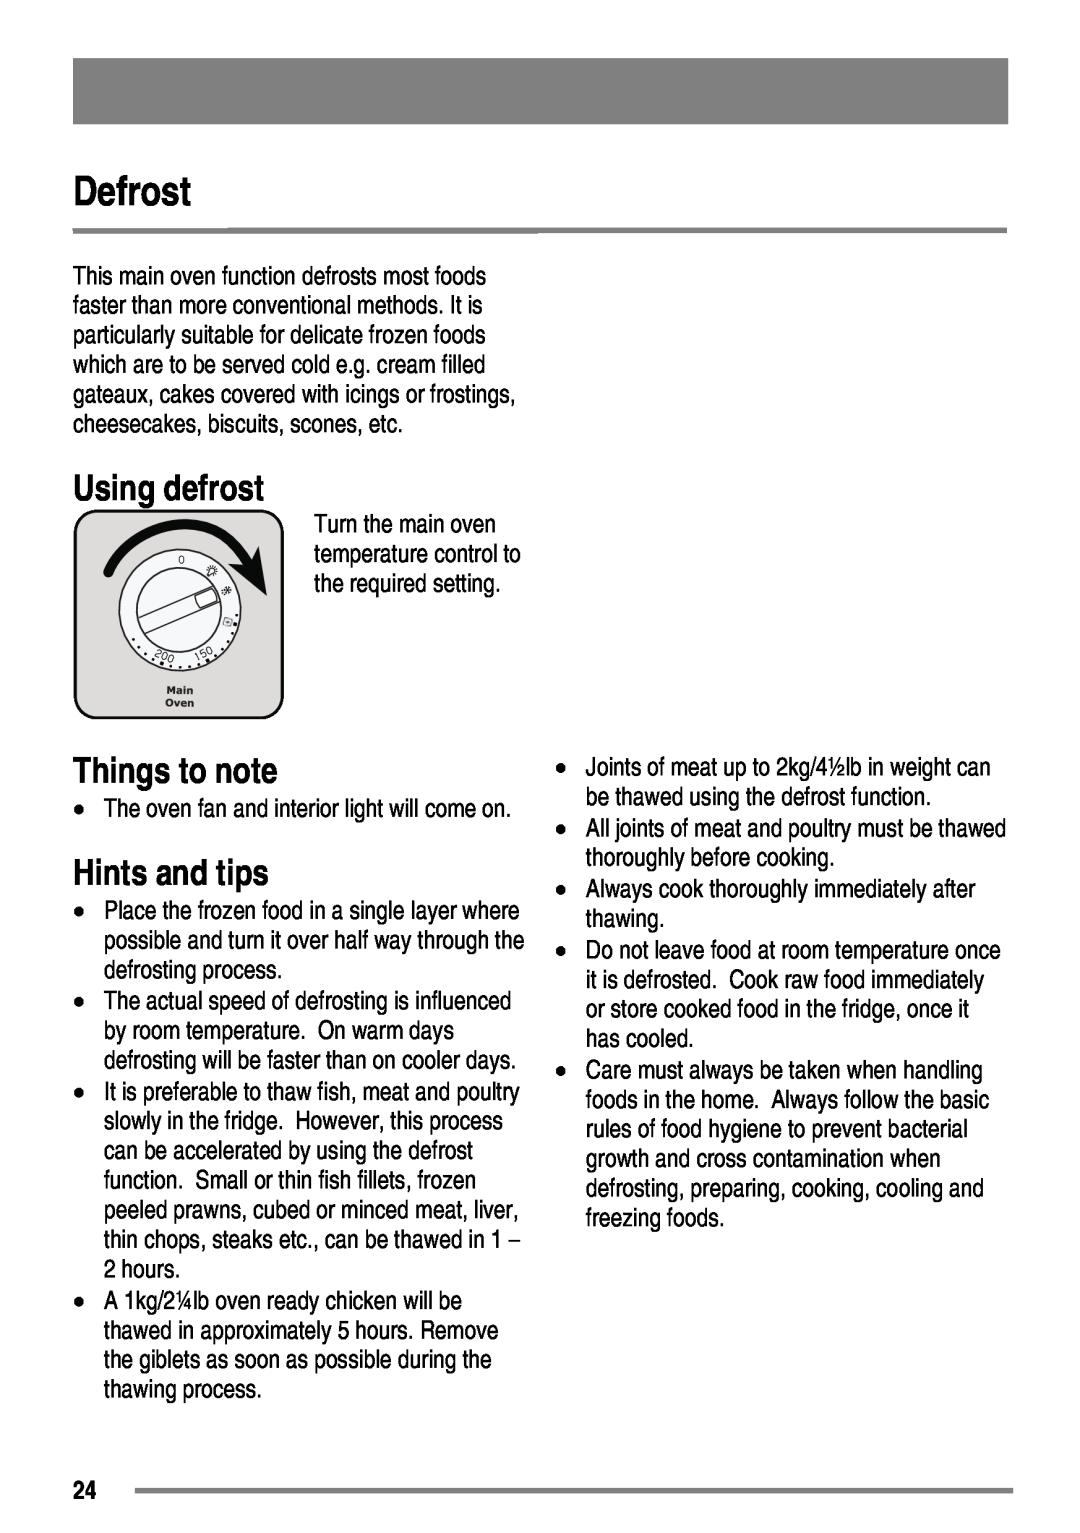 Zanussi ZKC6020 user manual Defrost, Using defrost, Things to note, Hints and tips 